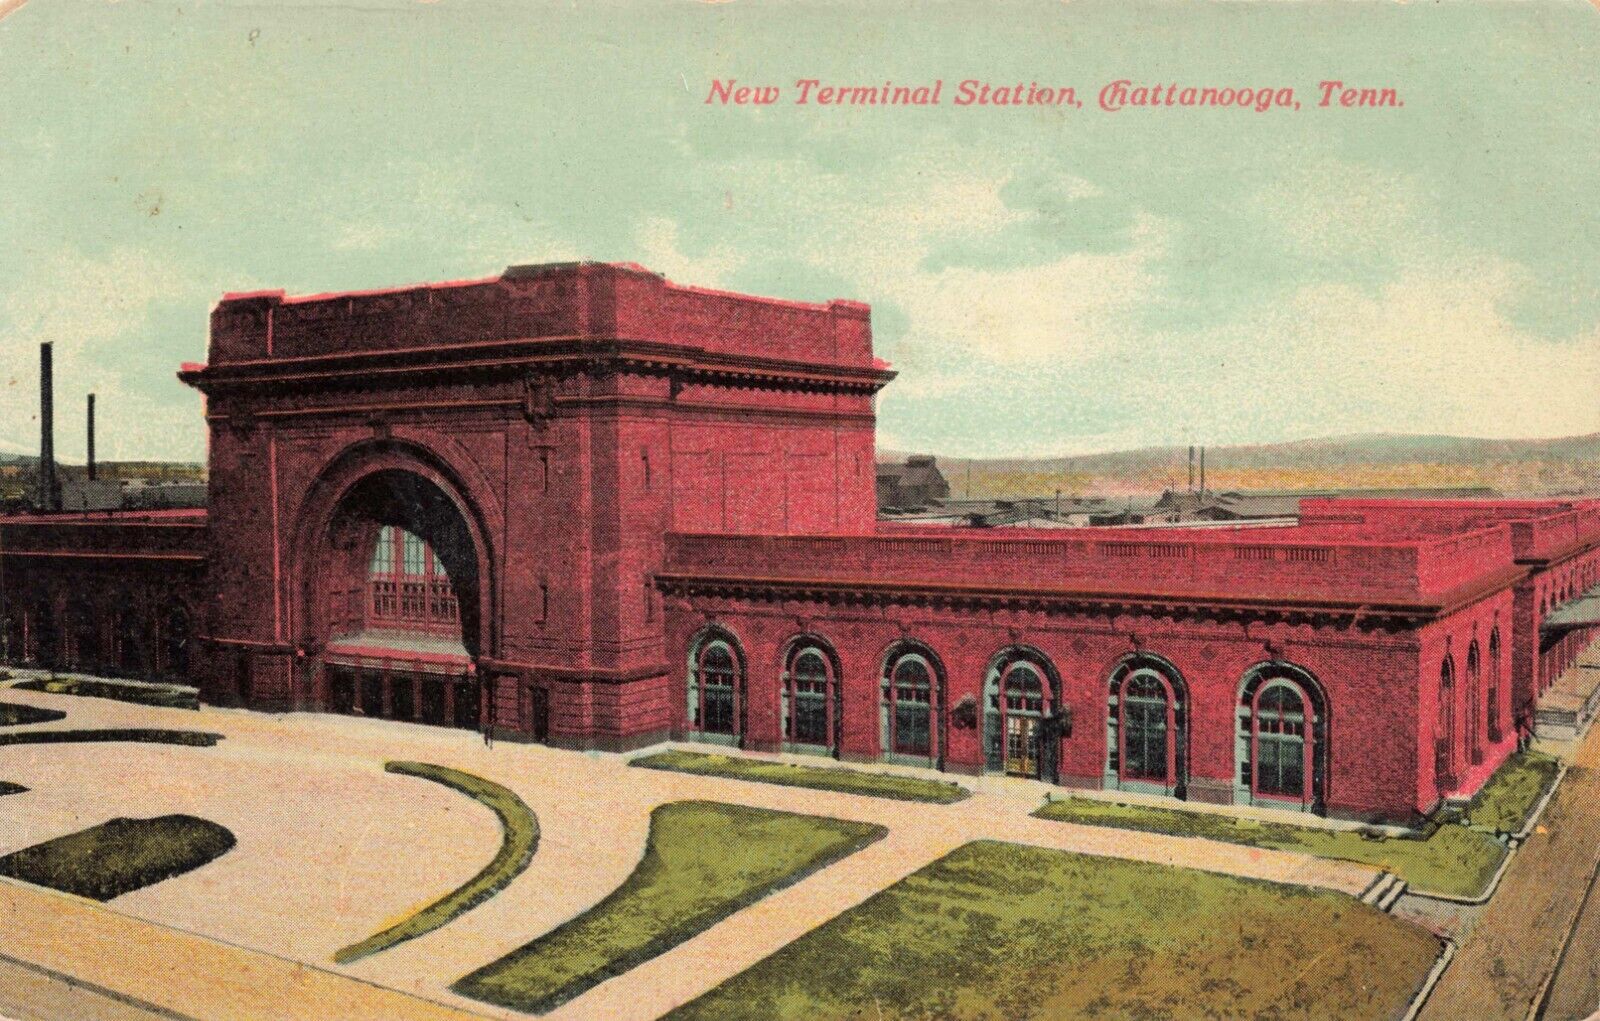 TN-Chattanooga, Tennessee-New Terminal Railroad Station c1910 A30